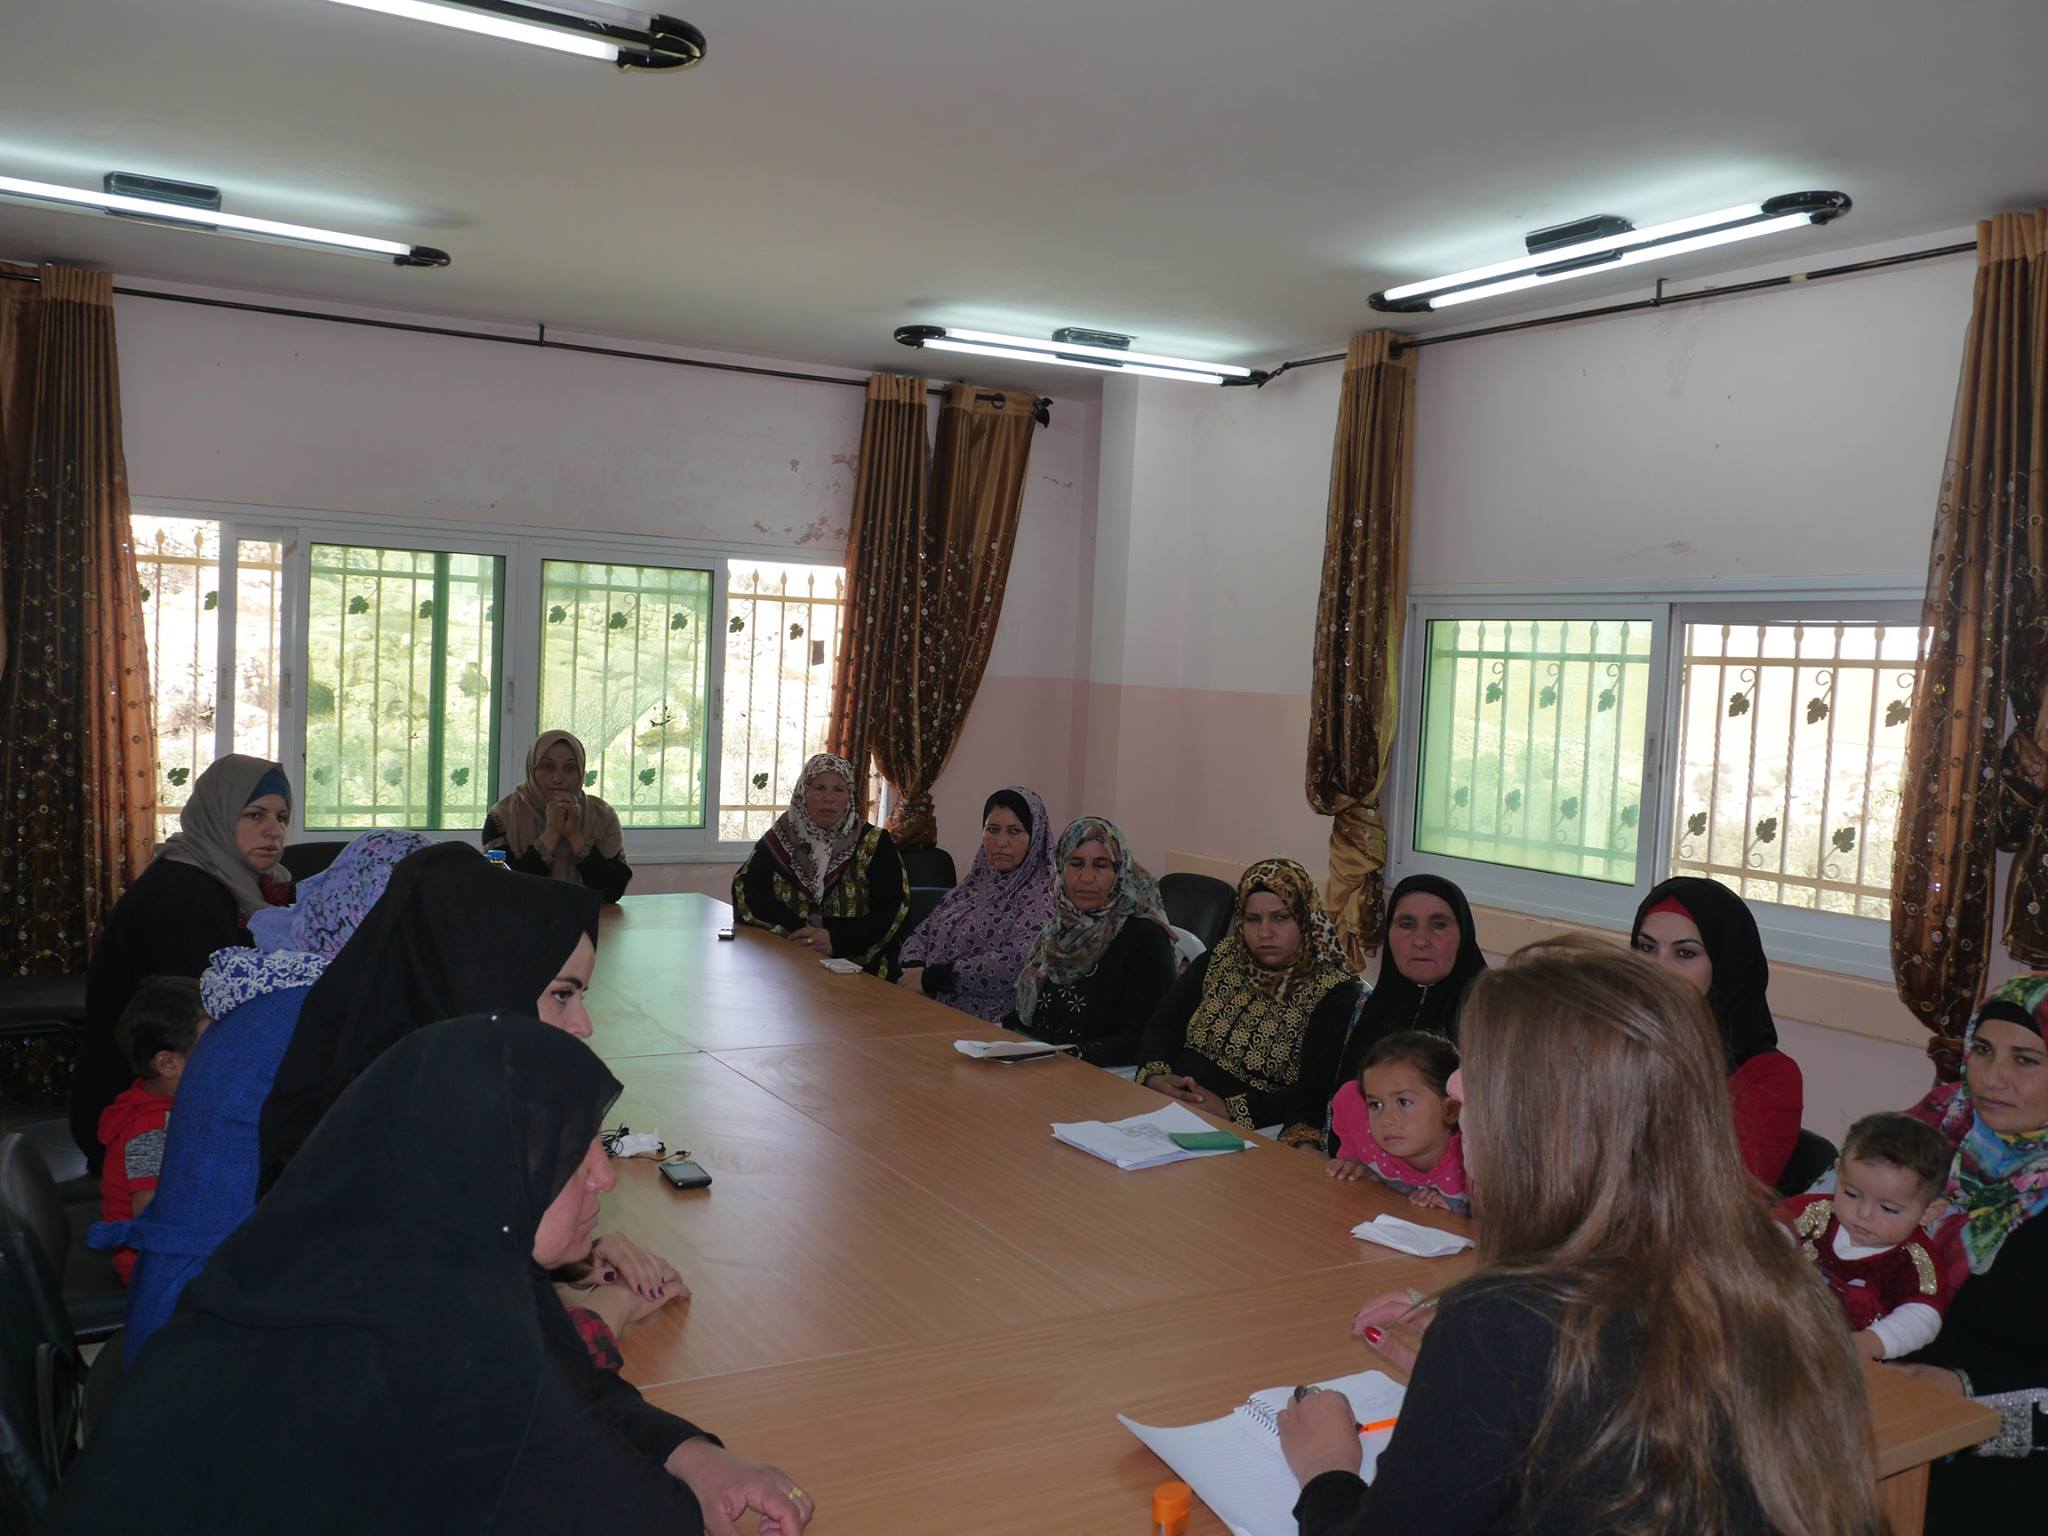  Supporting disadvantaged Bedouin and rural women to formalize and manage income-generating projects, in South of Hebron and East Jerusalem .